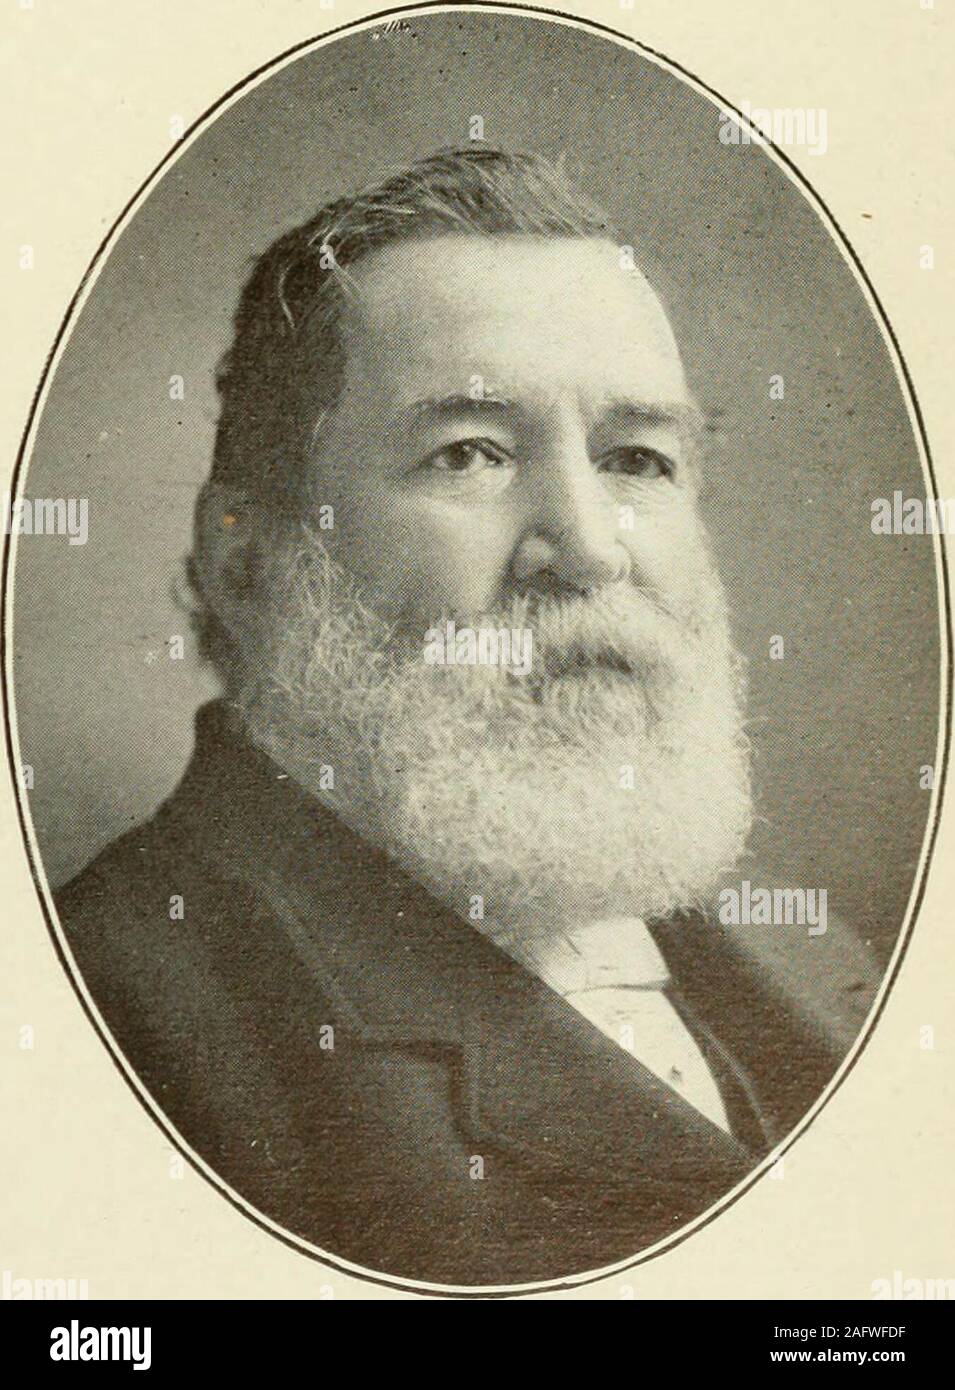 . Men of Minnesota; a collection of the portraits of men prominent in business and professional life in Minnesota. CHARLES S. HULBERT MINNEAPOLIS.CITY TREAS. VICE PRES. SWED. AM. NATl BANK. JOSHUA ROGERS MINNEAPOLIS.CITY COMPTROLLER (190O—). 50 MEN OF MINNESOTA. Stock Photo